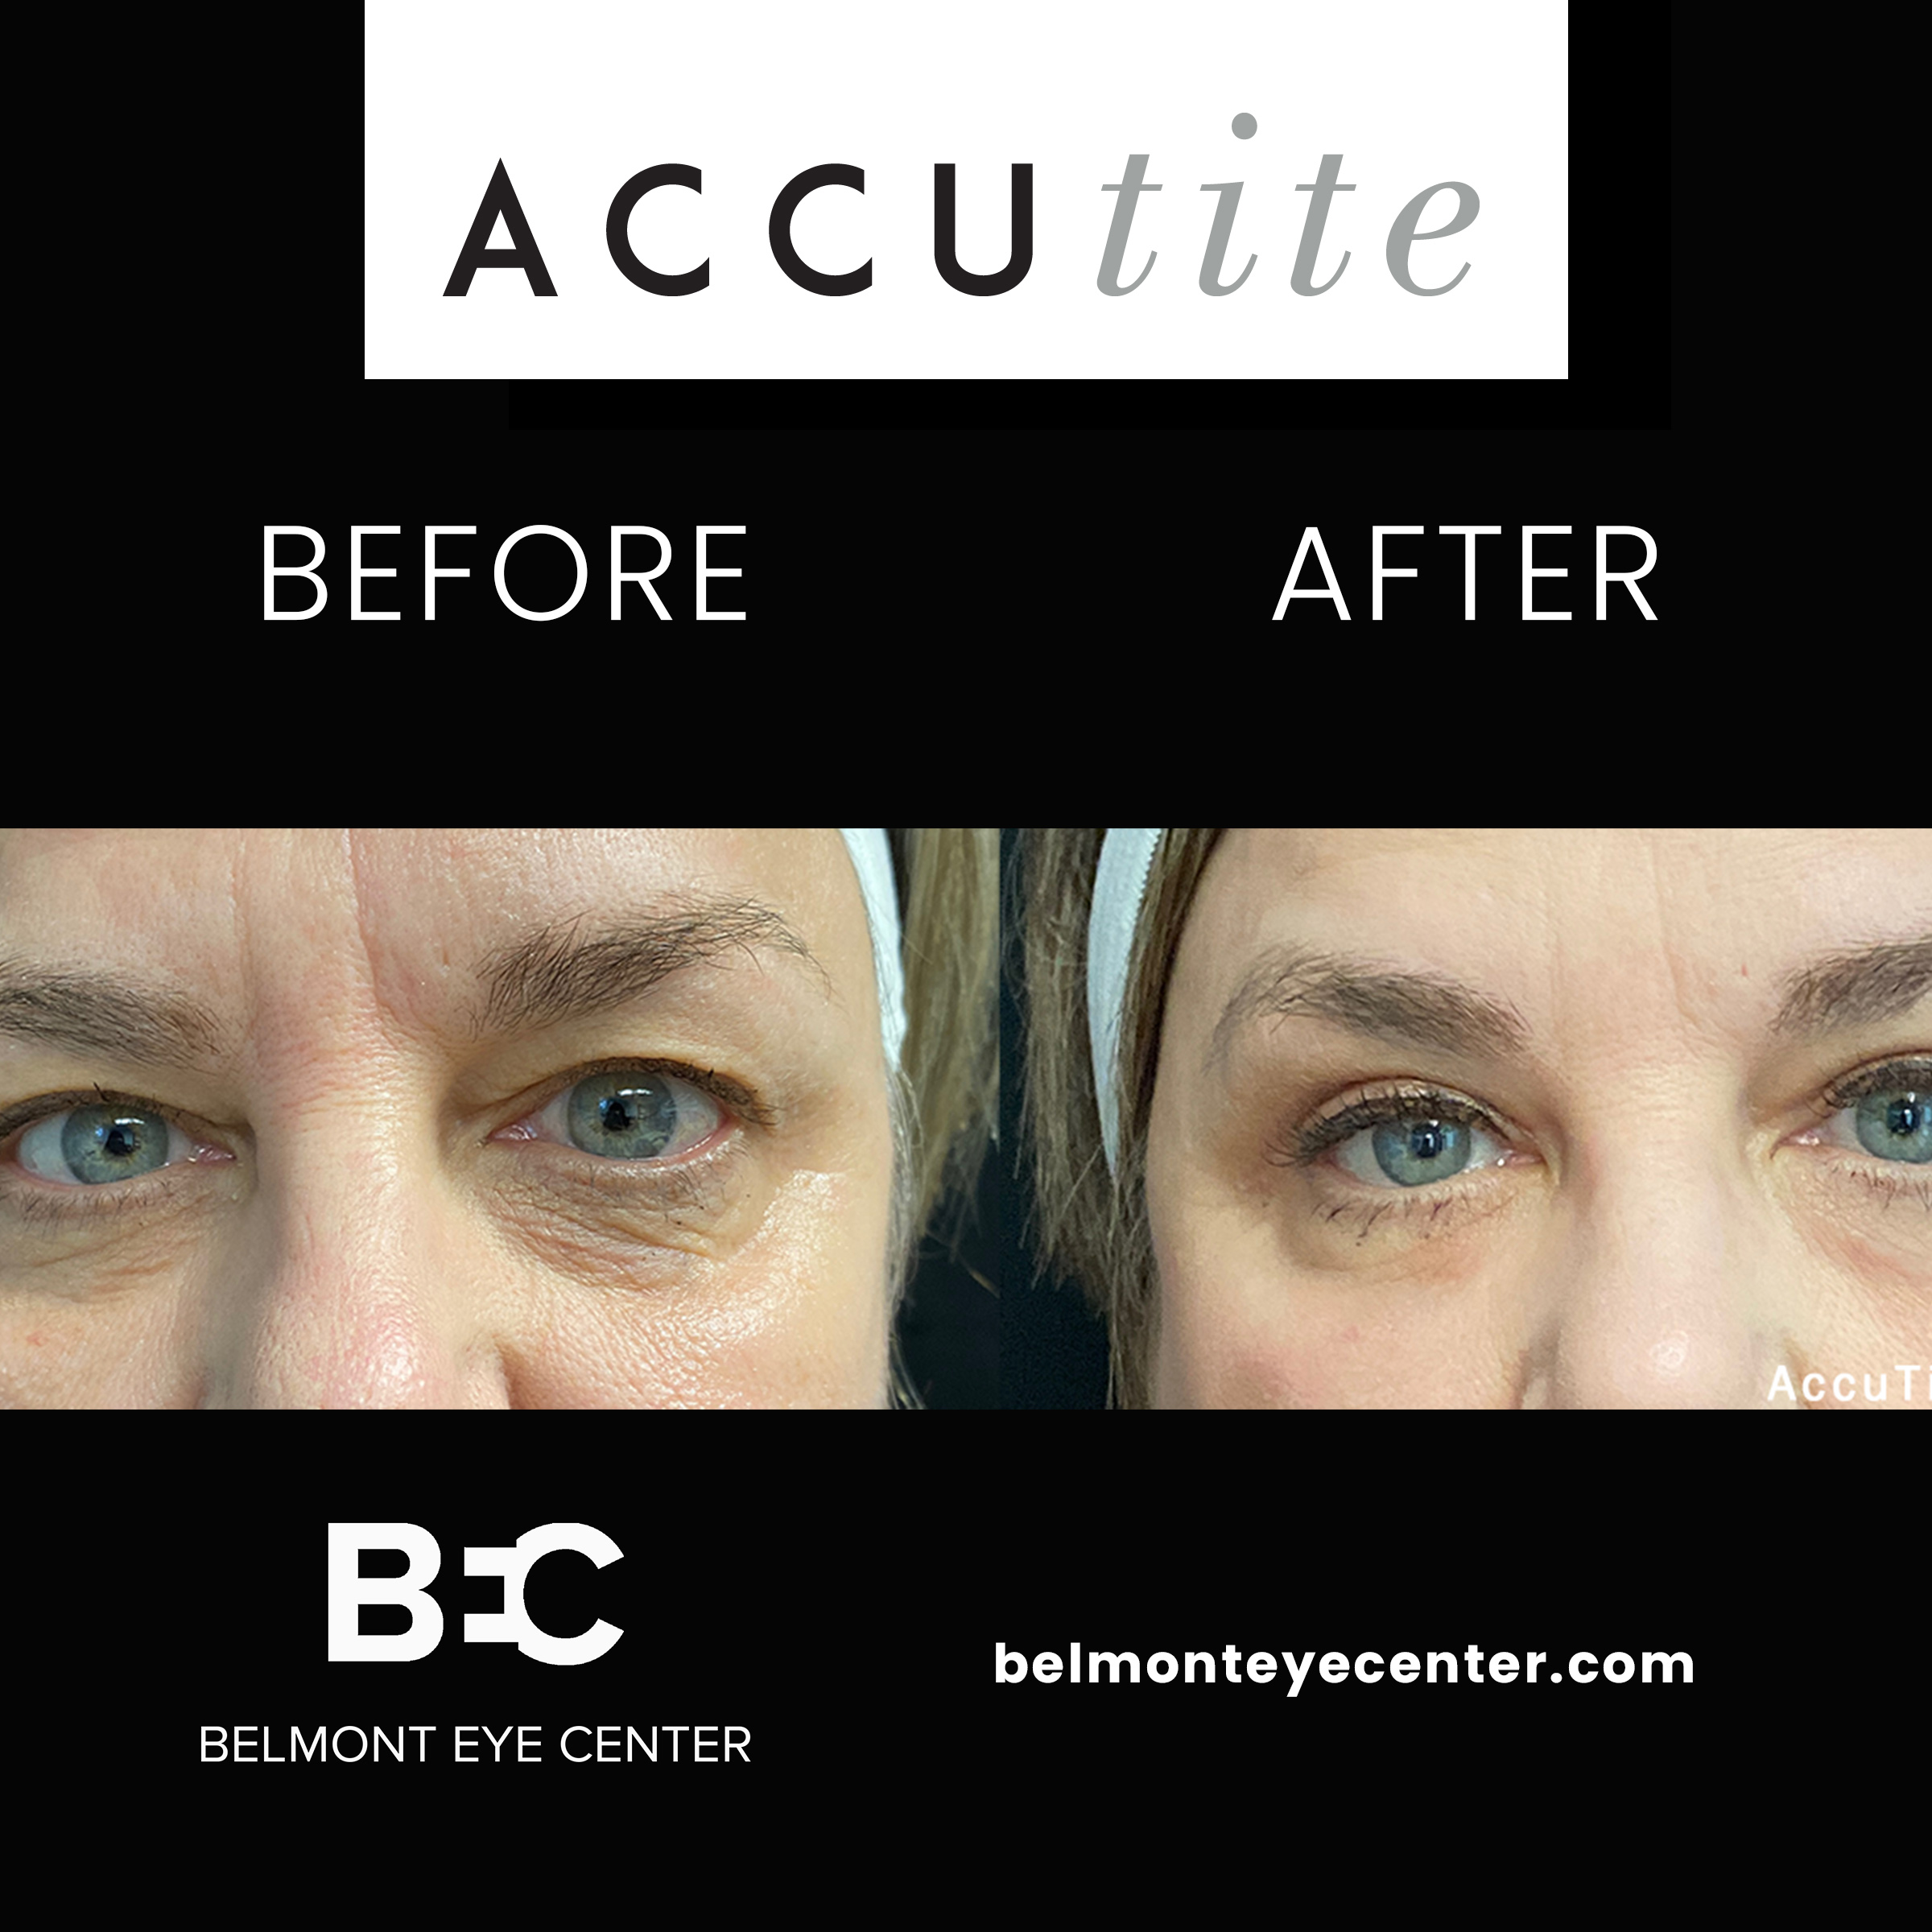 before after accutite